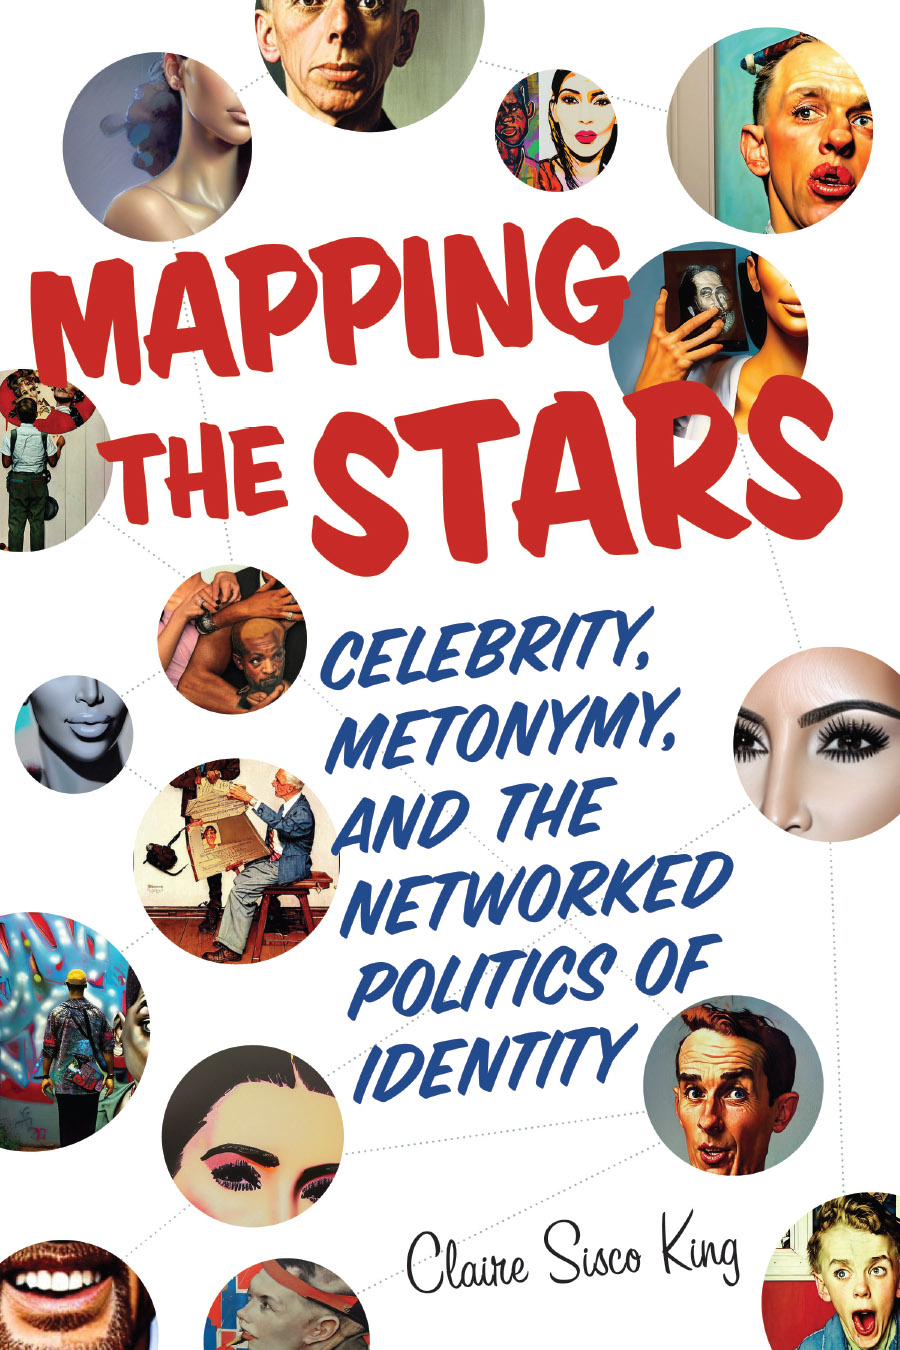 Front cover of Mapping the Stars: Celebrity, Metonymy, and the Networked Politics of Identity, by Claire Sisco King, featuring several small circular images of people who look like celebrities, linked by dotted lines.